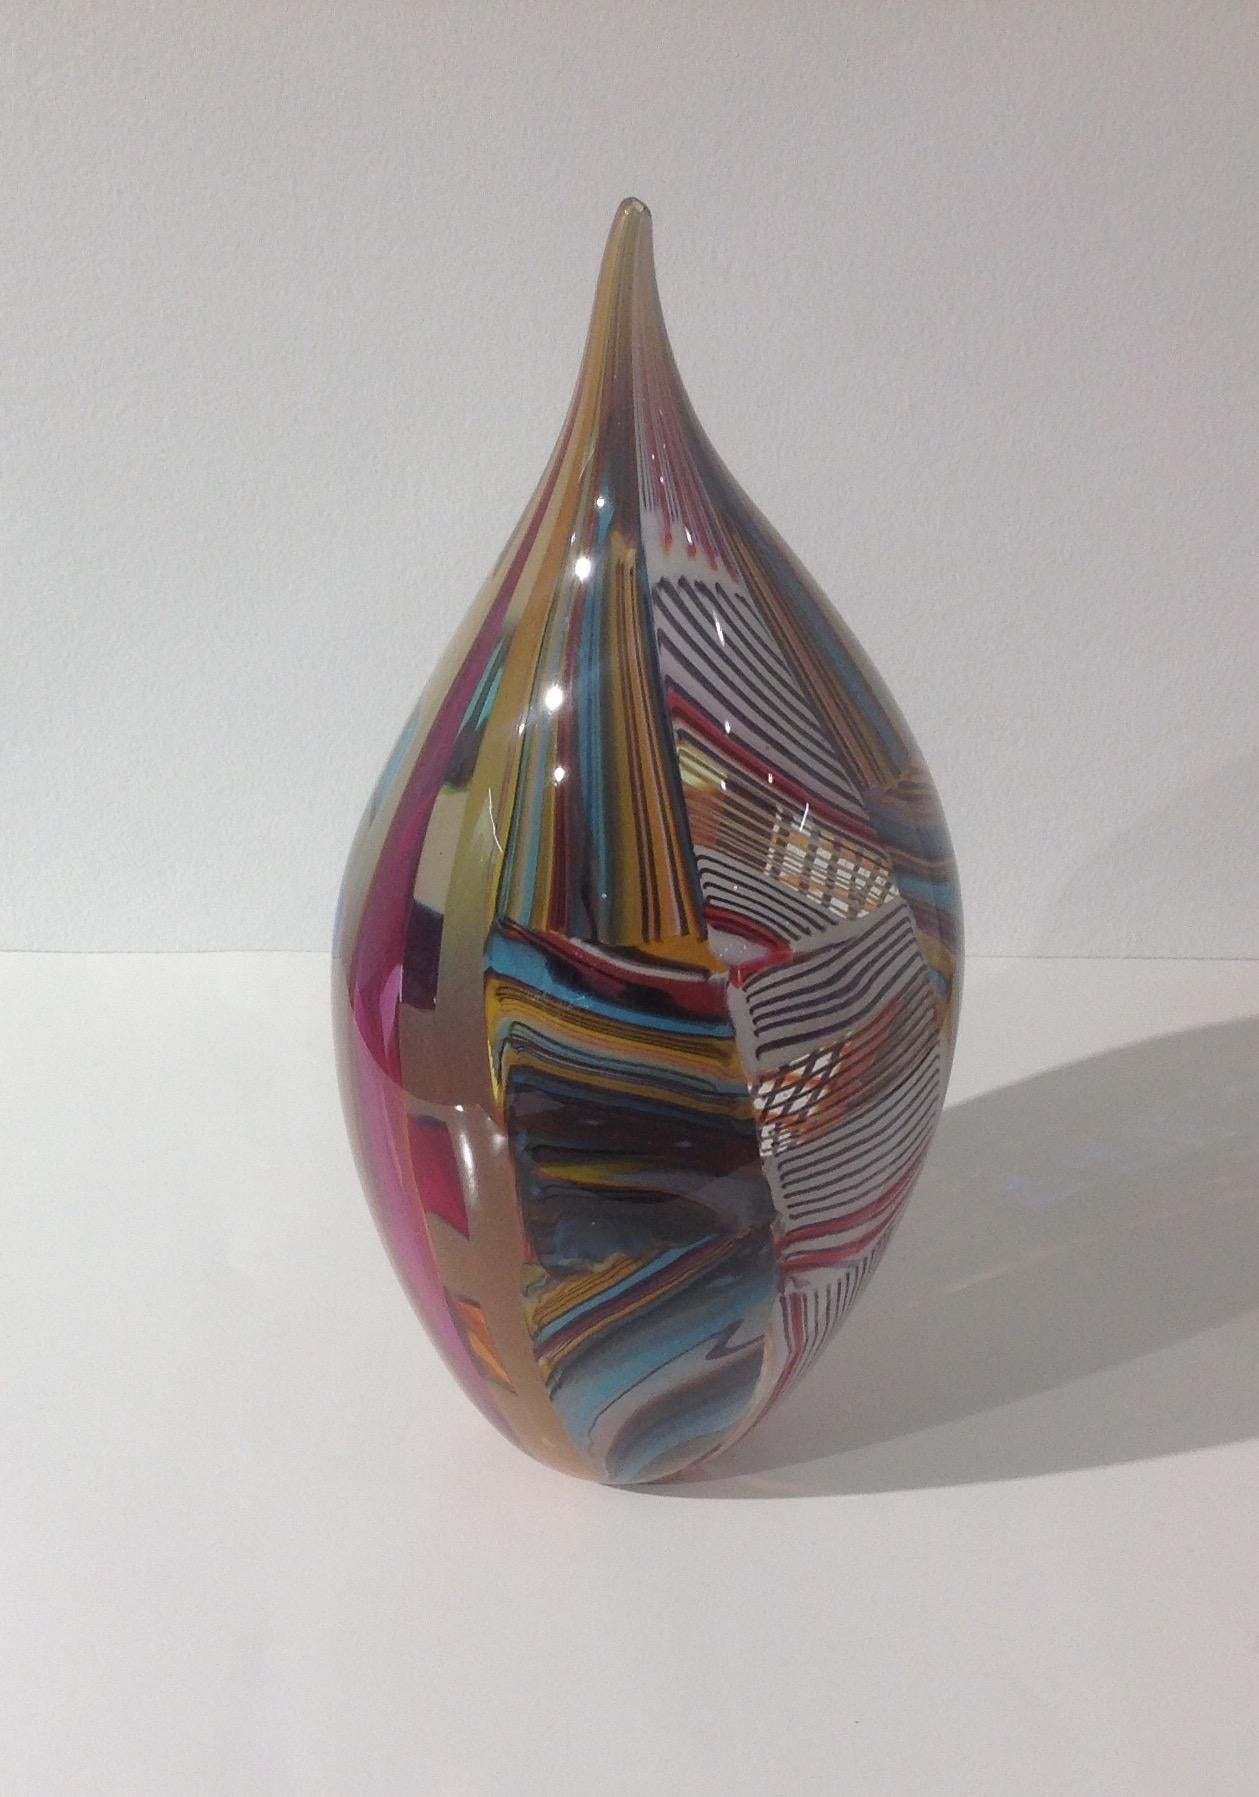 Signed art glass vase by Afro Celotto from the island of Murano.